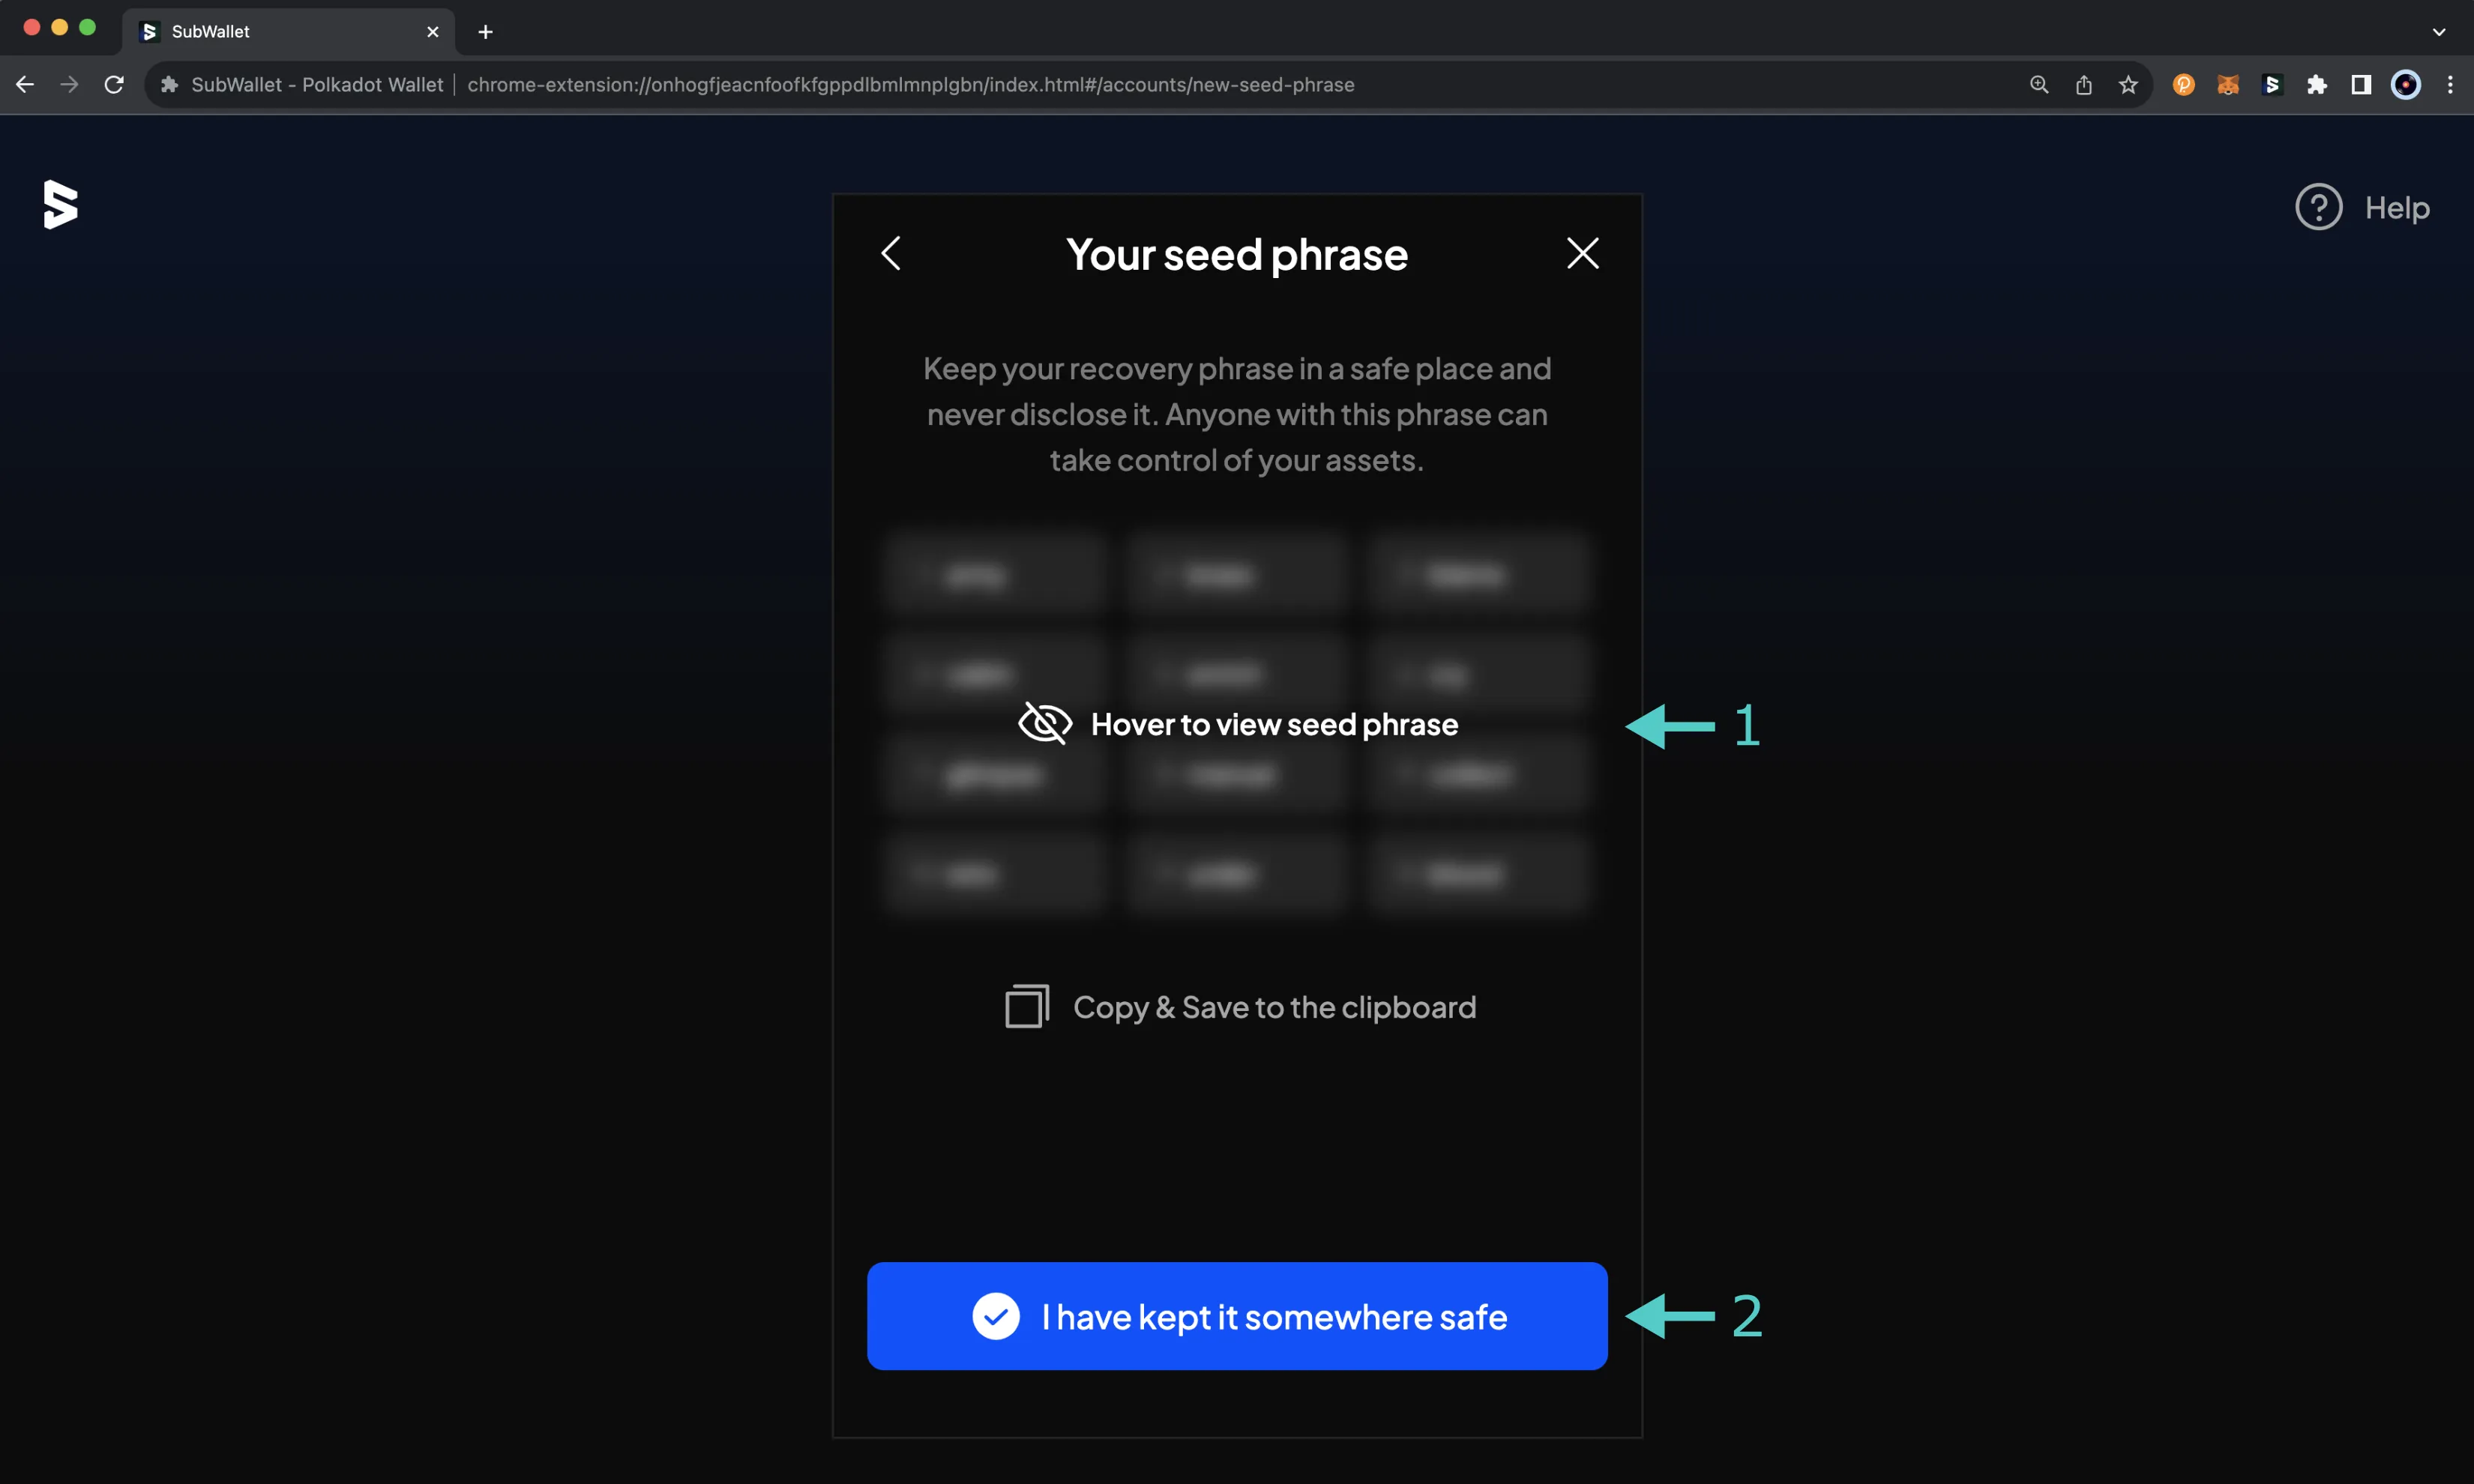 Back up your seed phrase on the SubWallet browser extension.